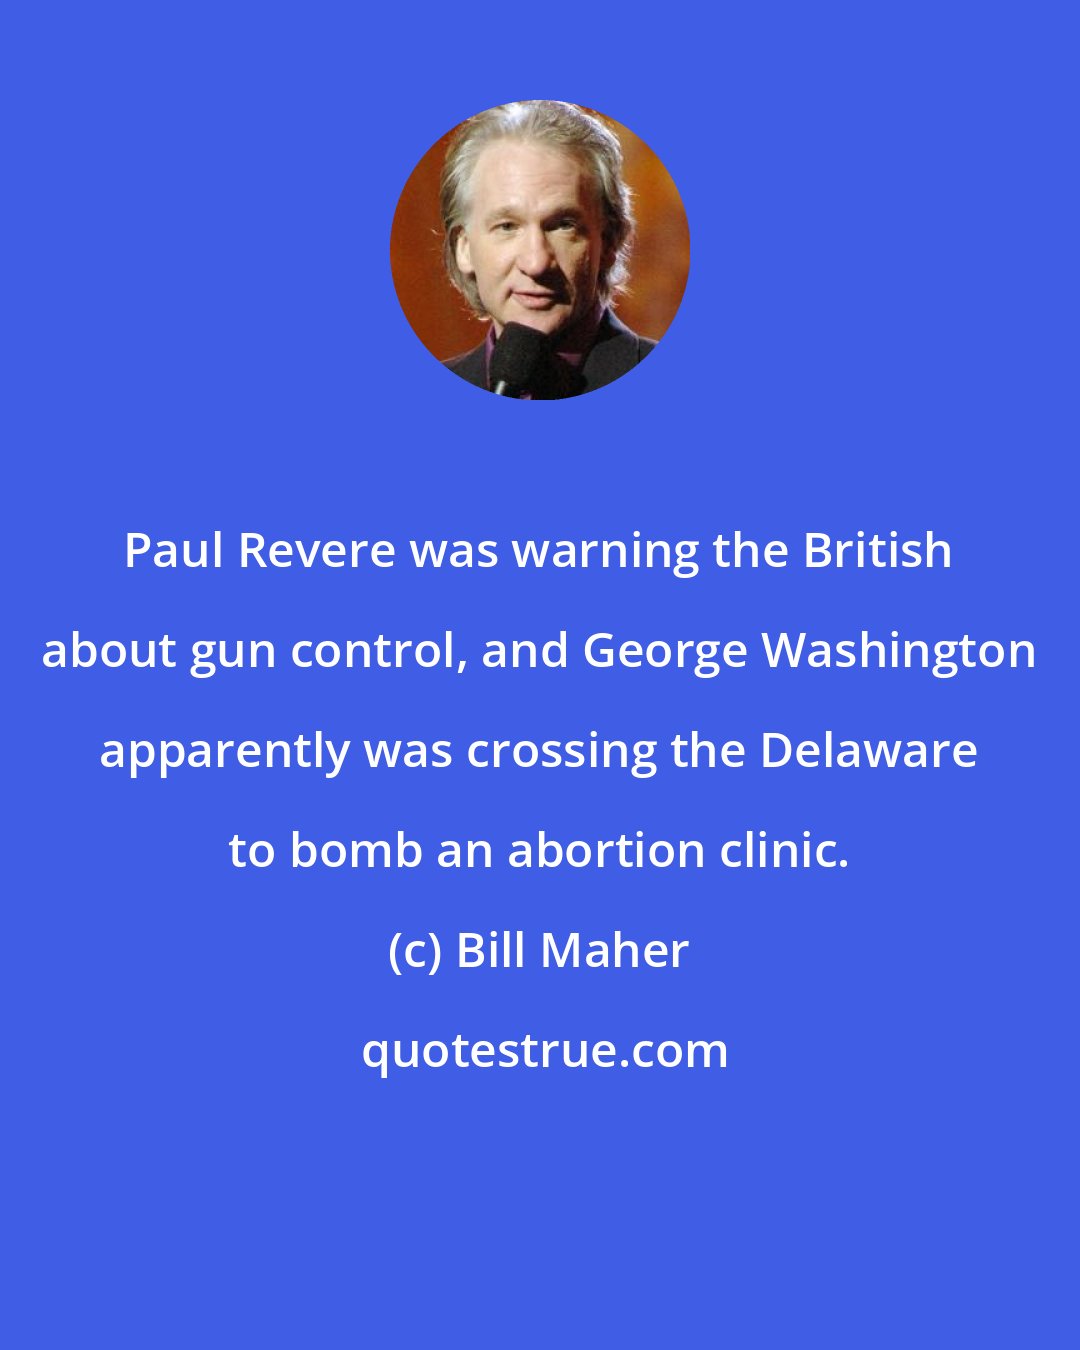 Bill Maher: Paul Revere was warning the British about gun control, and George Washington apparently was crossing the Delaware to bomb an abortion clinic.